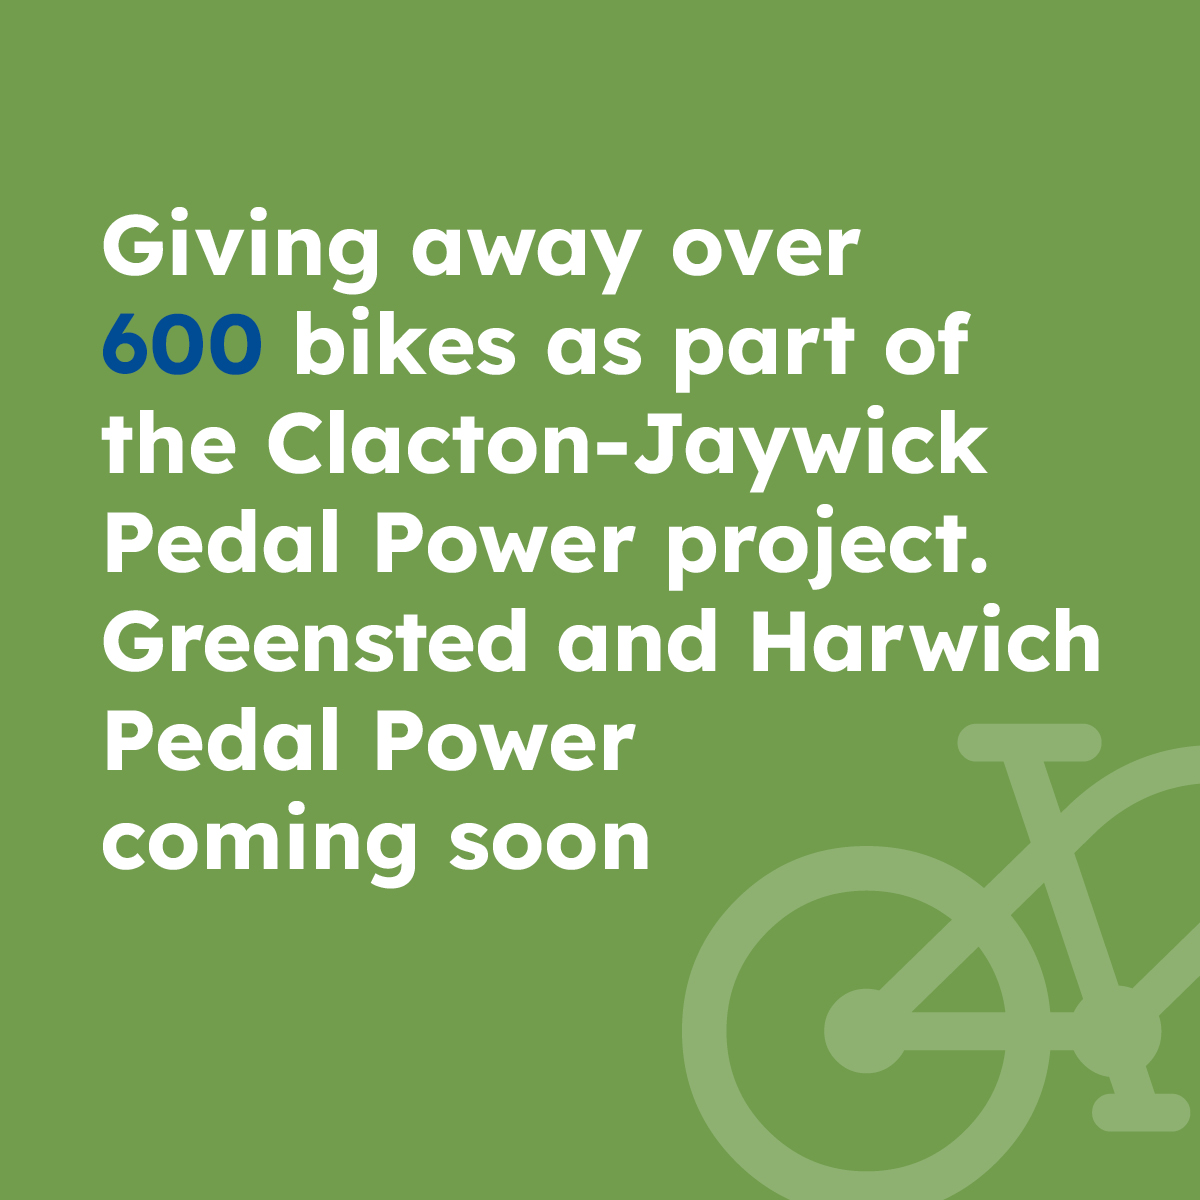 Have given away 600 bikes a part of the Clacton-Jaywick Pedal Power project and Harwich Pedal Power coming soon